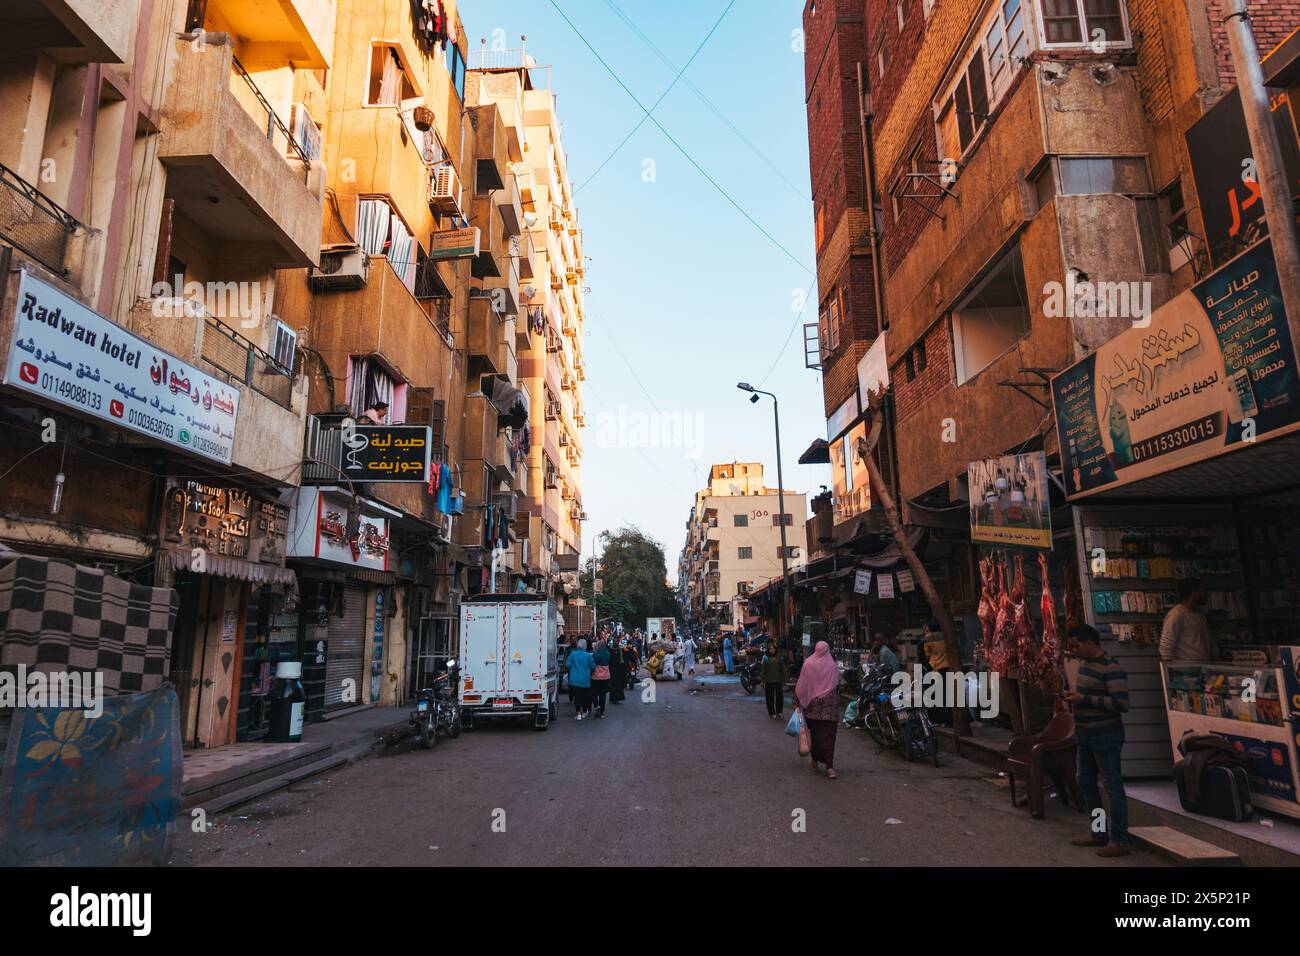 a bustling street with various stalls selling food and clothing in the city of Aswan, Egypt Stock Photo